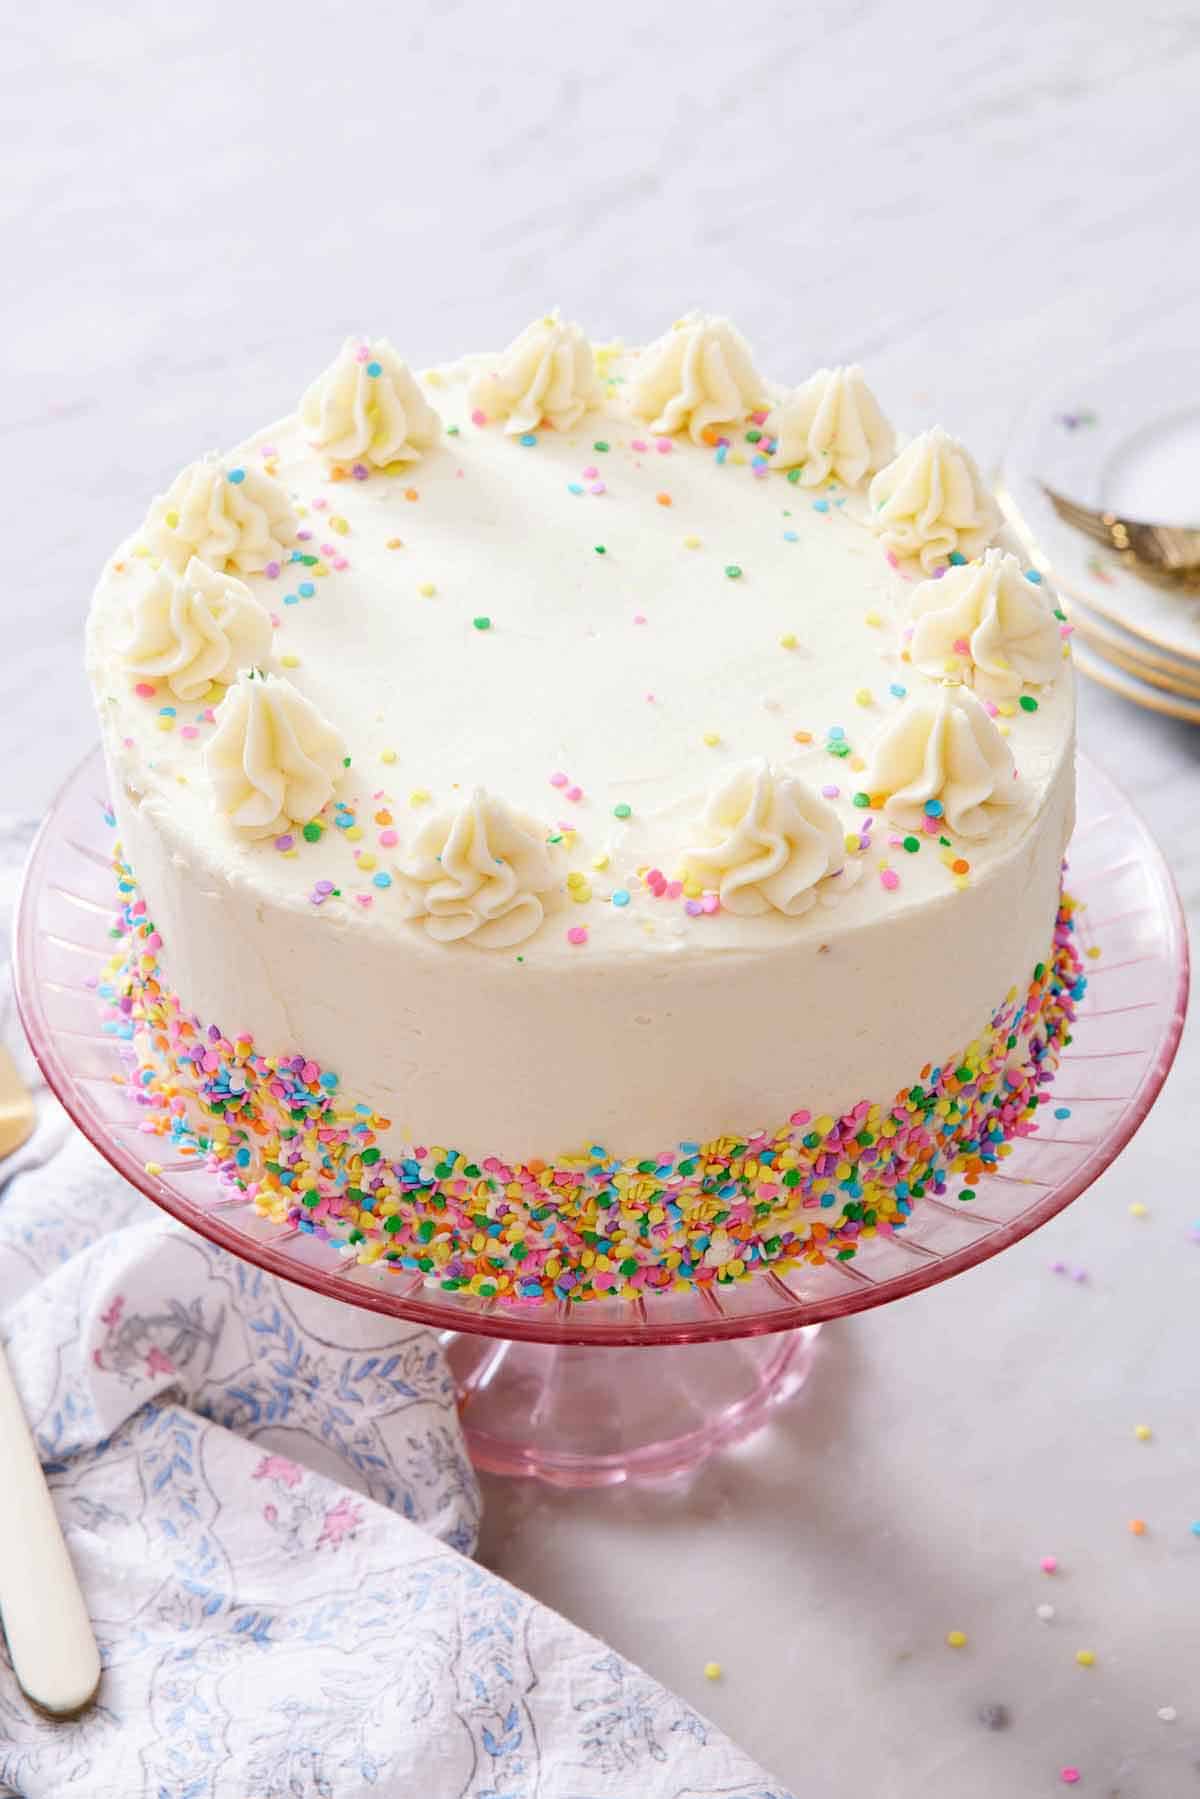 A white cake on a pink cake stand with dollops of frosting on the edge and rainbow sprinkles scattered around and on the edge.